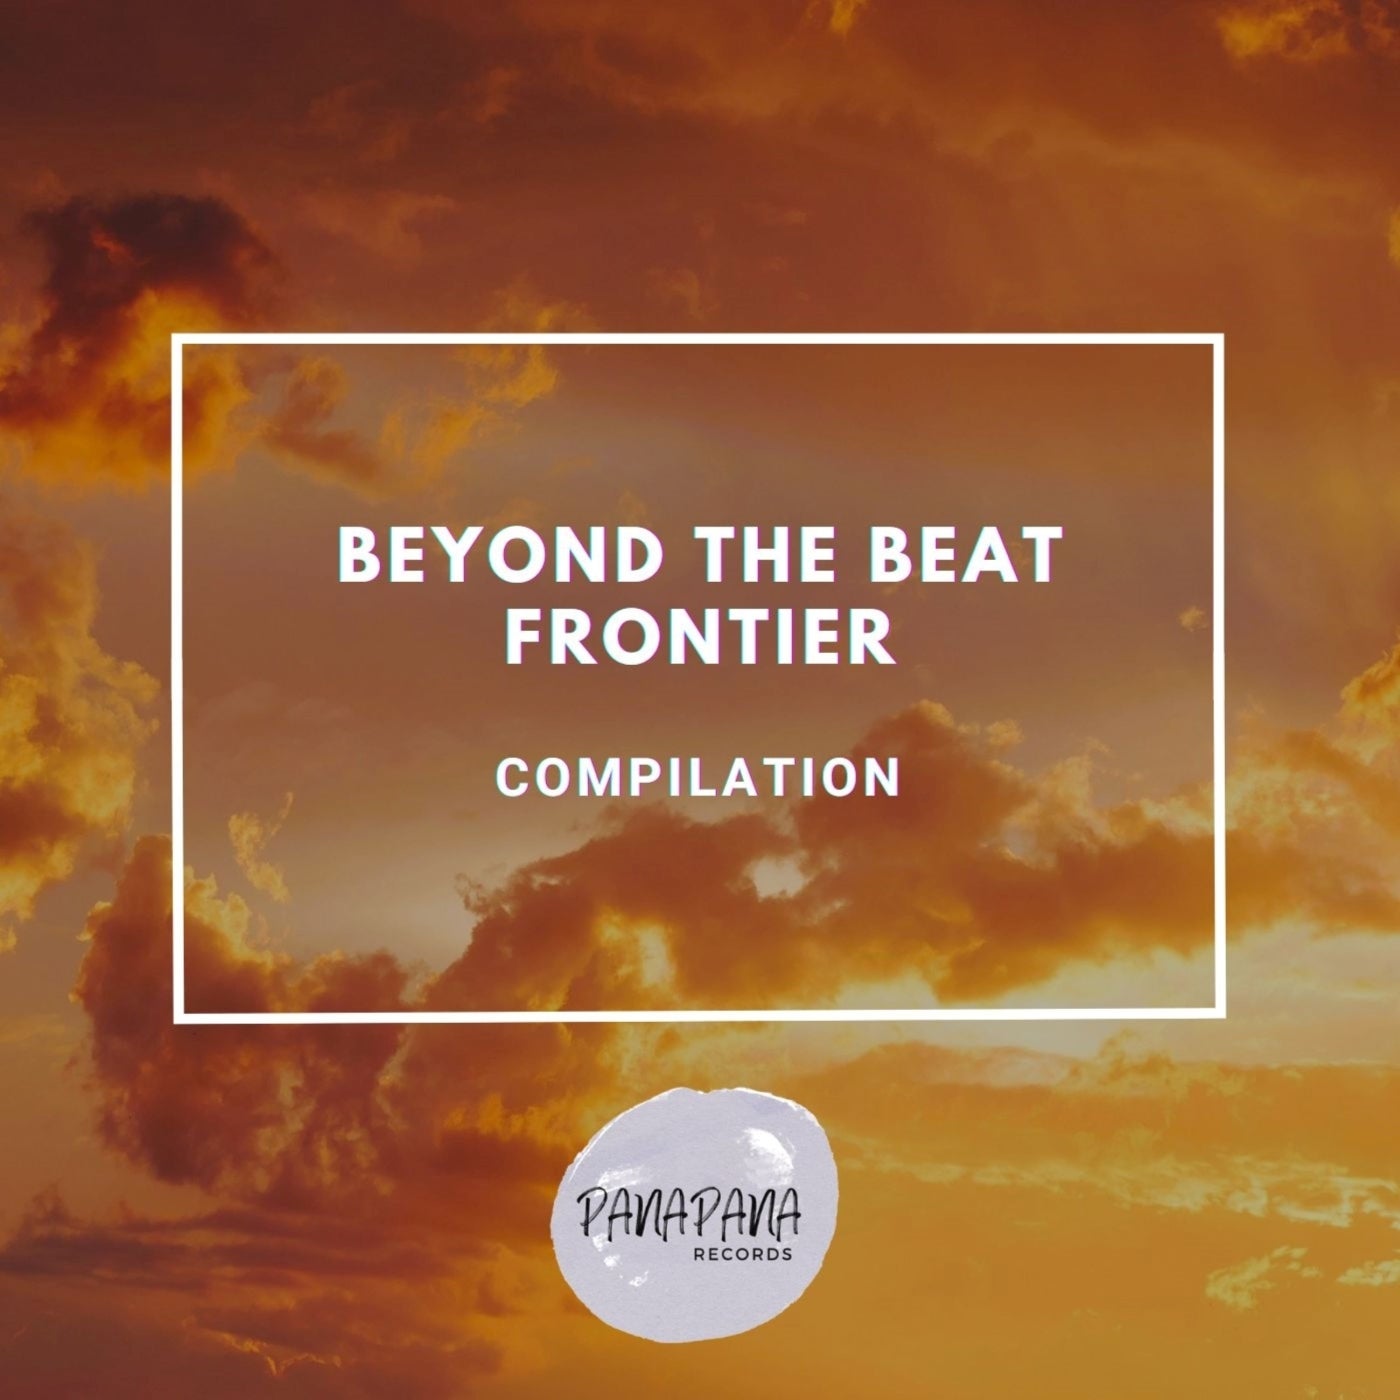 Beyond the Beat Frontier